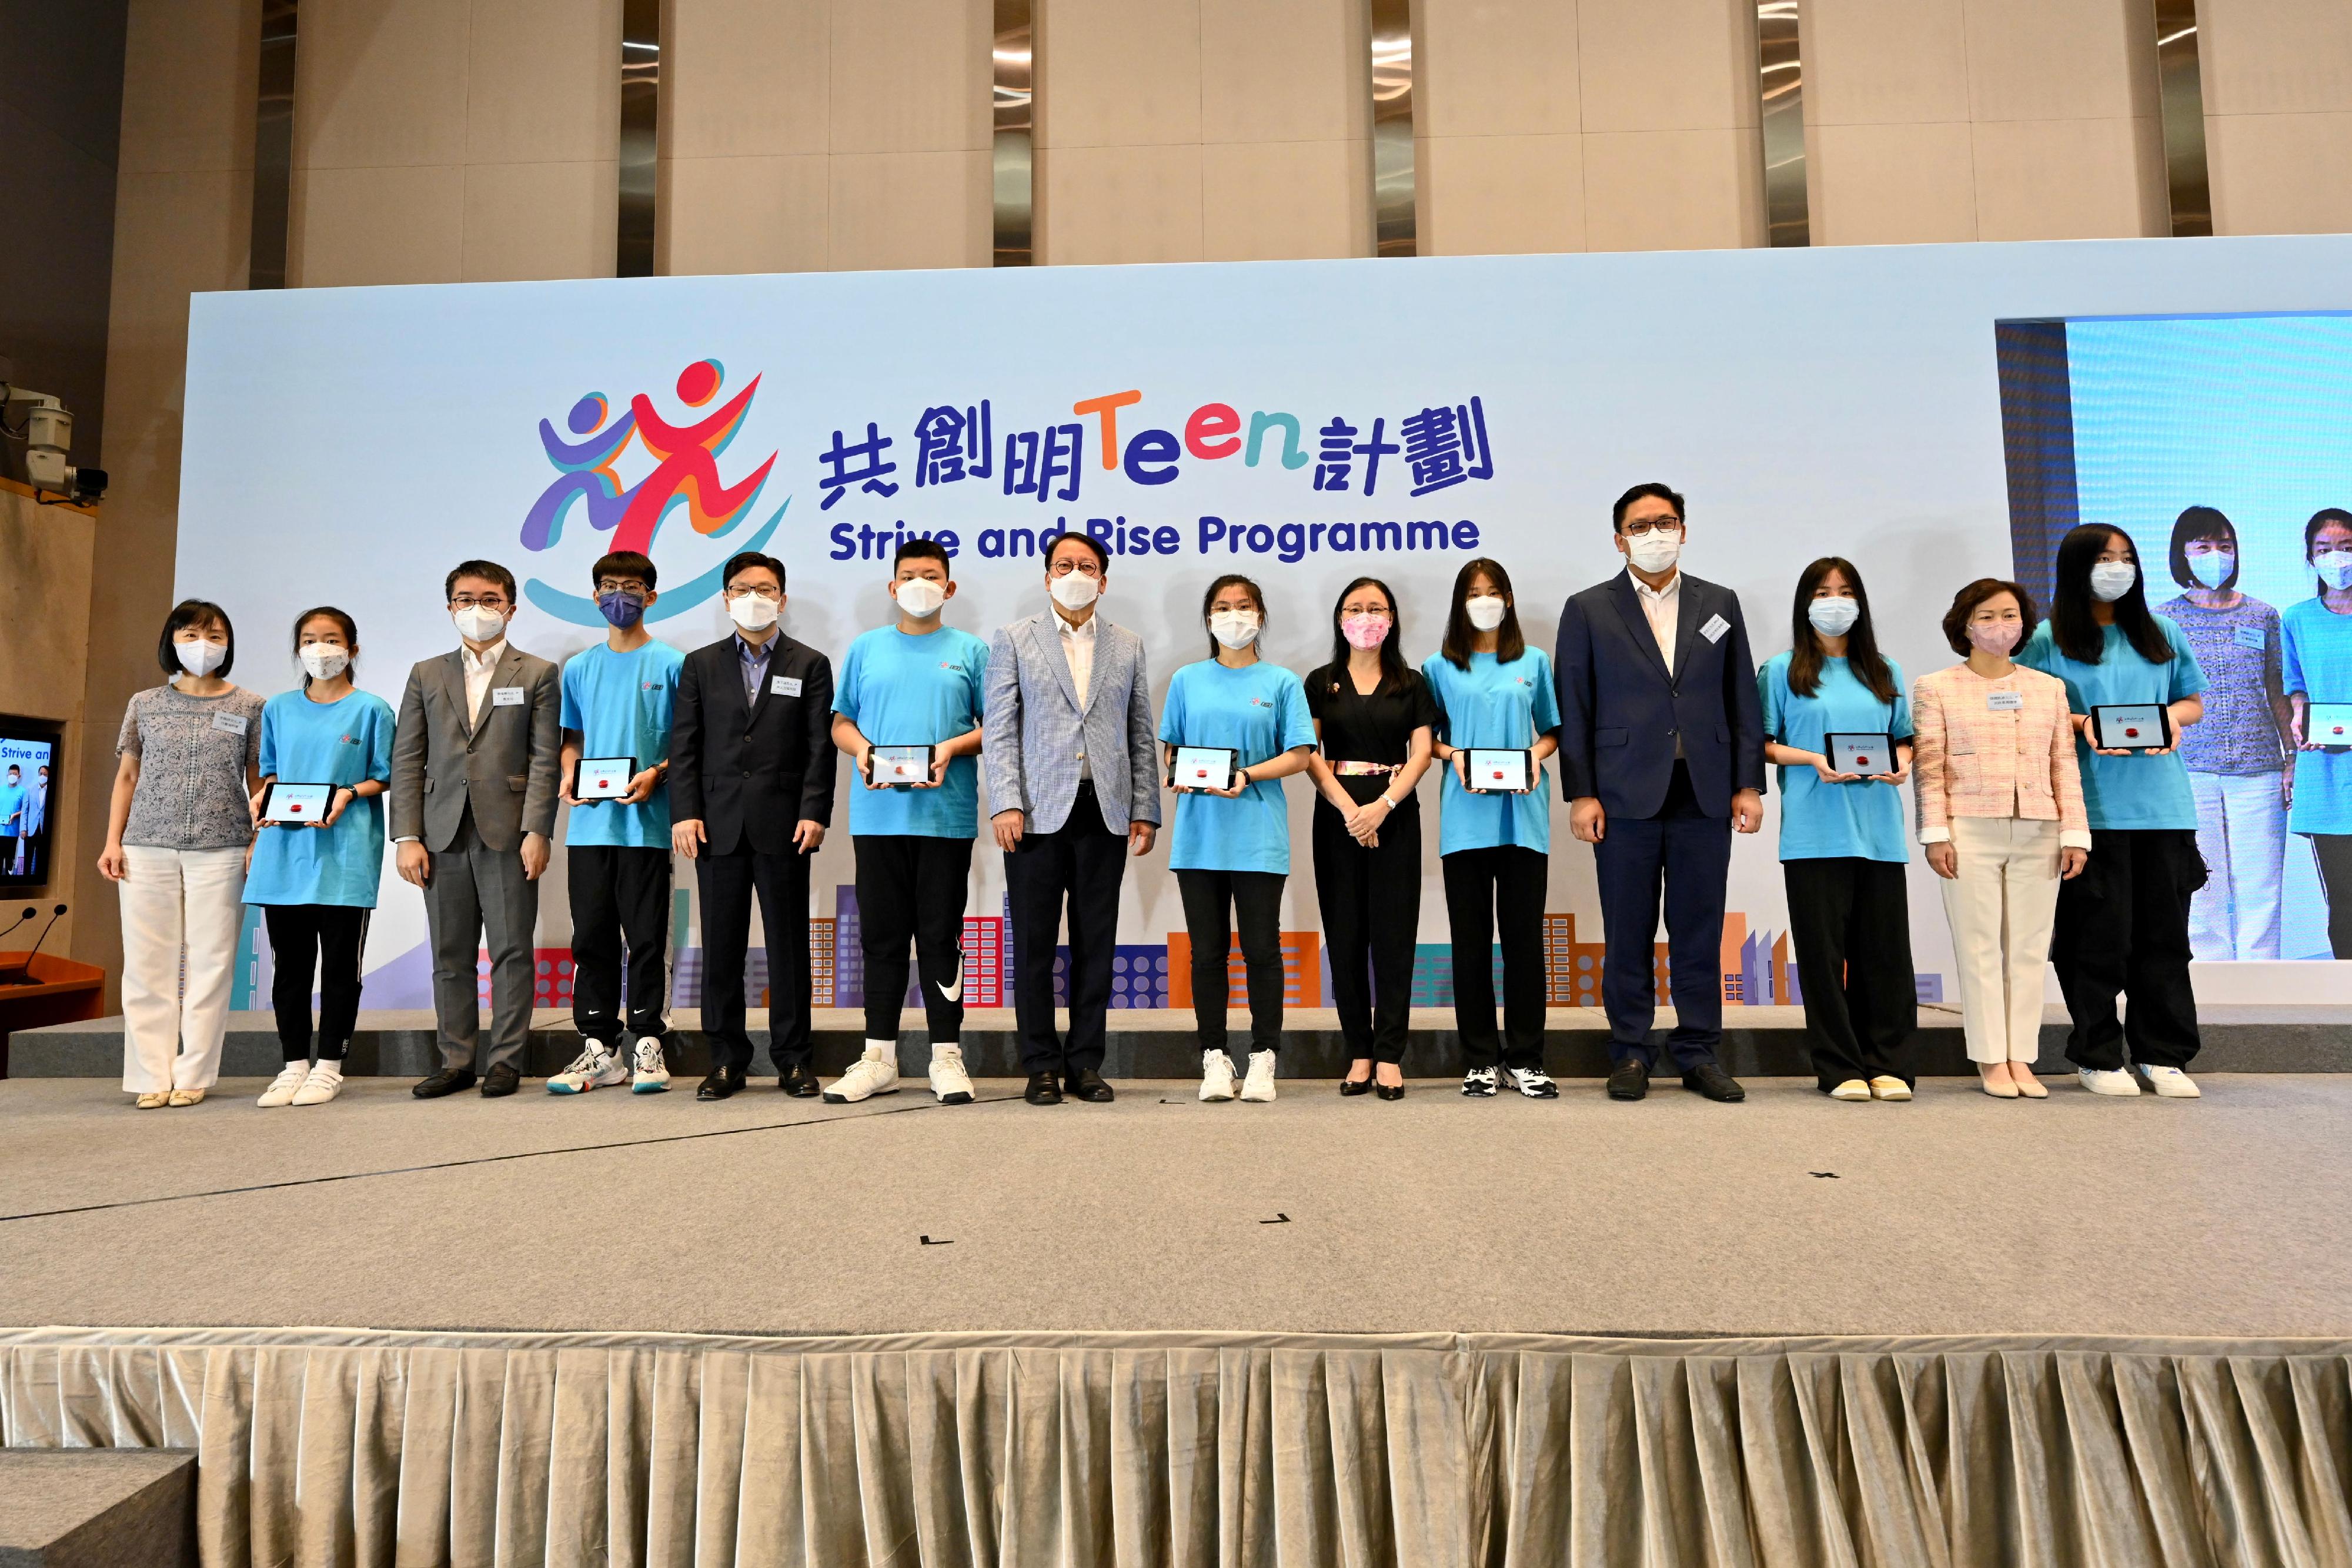 The Chief Secretary for Administration, Mr Chan Kwok-ki, attended the Kick-off Ceremony and Orientation Day of the Strive and Rise Programme today (October 29). Photo shows Mr Chan (seventh left); the Secretary for Labour and Welfare, Mr Chris Sun (fifth left);  the Permanent Secretary for Labour and Welfare, Ms Alice Lau (sixth right); the Under Secretary for Education, Mr Sze Chun-fai (third left); the Under Secretary for Home and Youth Affairs, Mr Clarence Leung (fourth right); the Director of Social Welfare, Miss Charmaine Lee (first left); and the Director of Home Affairs, Mrs Alice Cheung (second right), officiating at the kick-off ceremony.